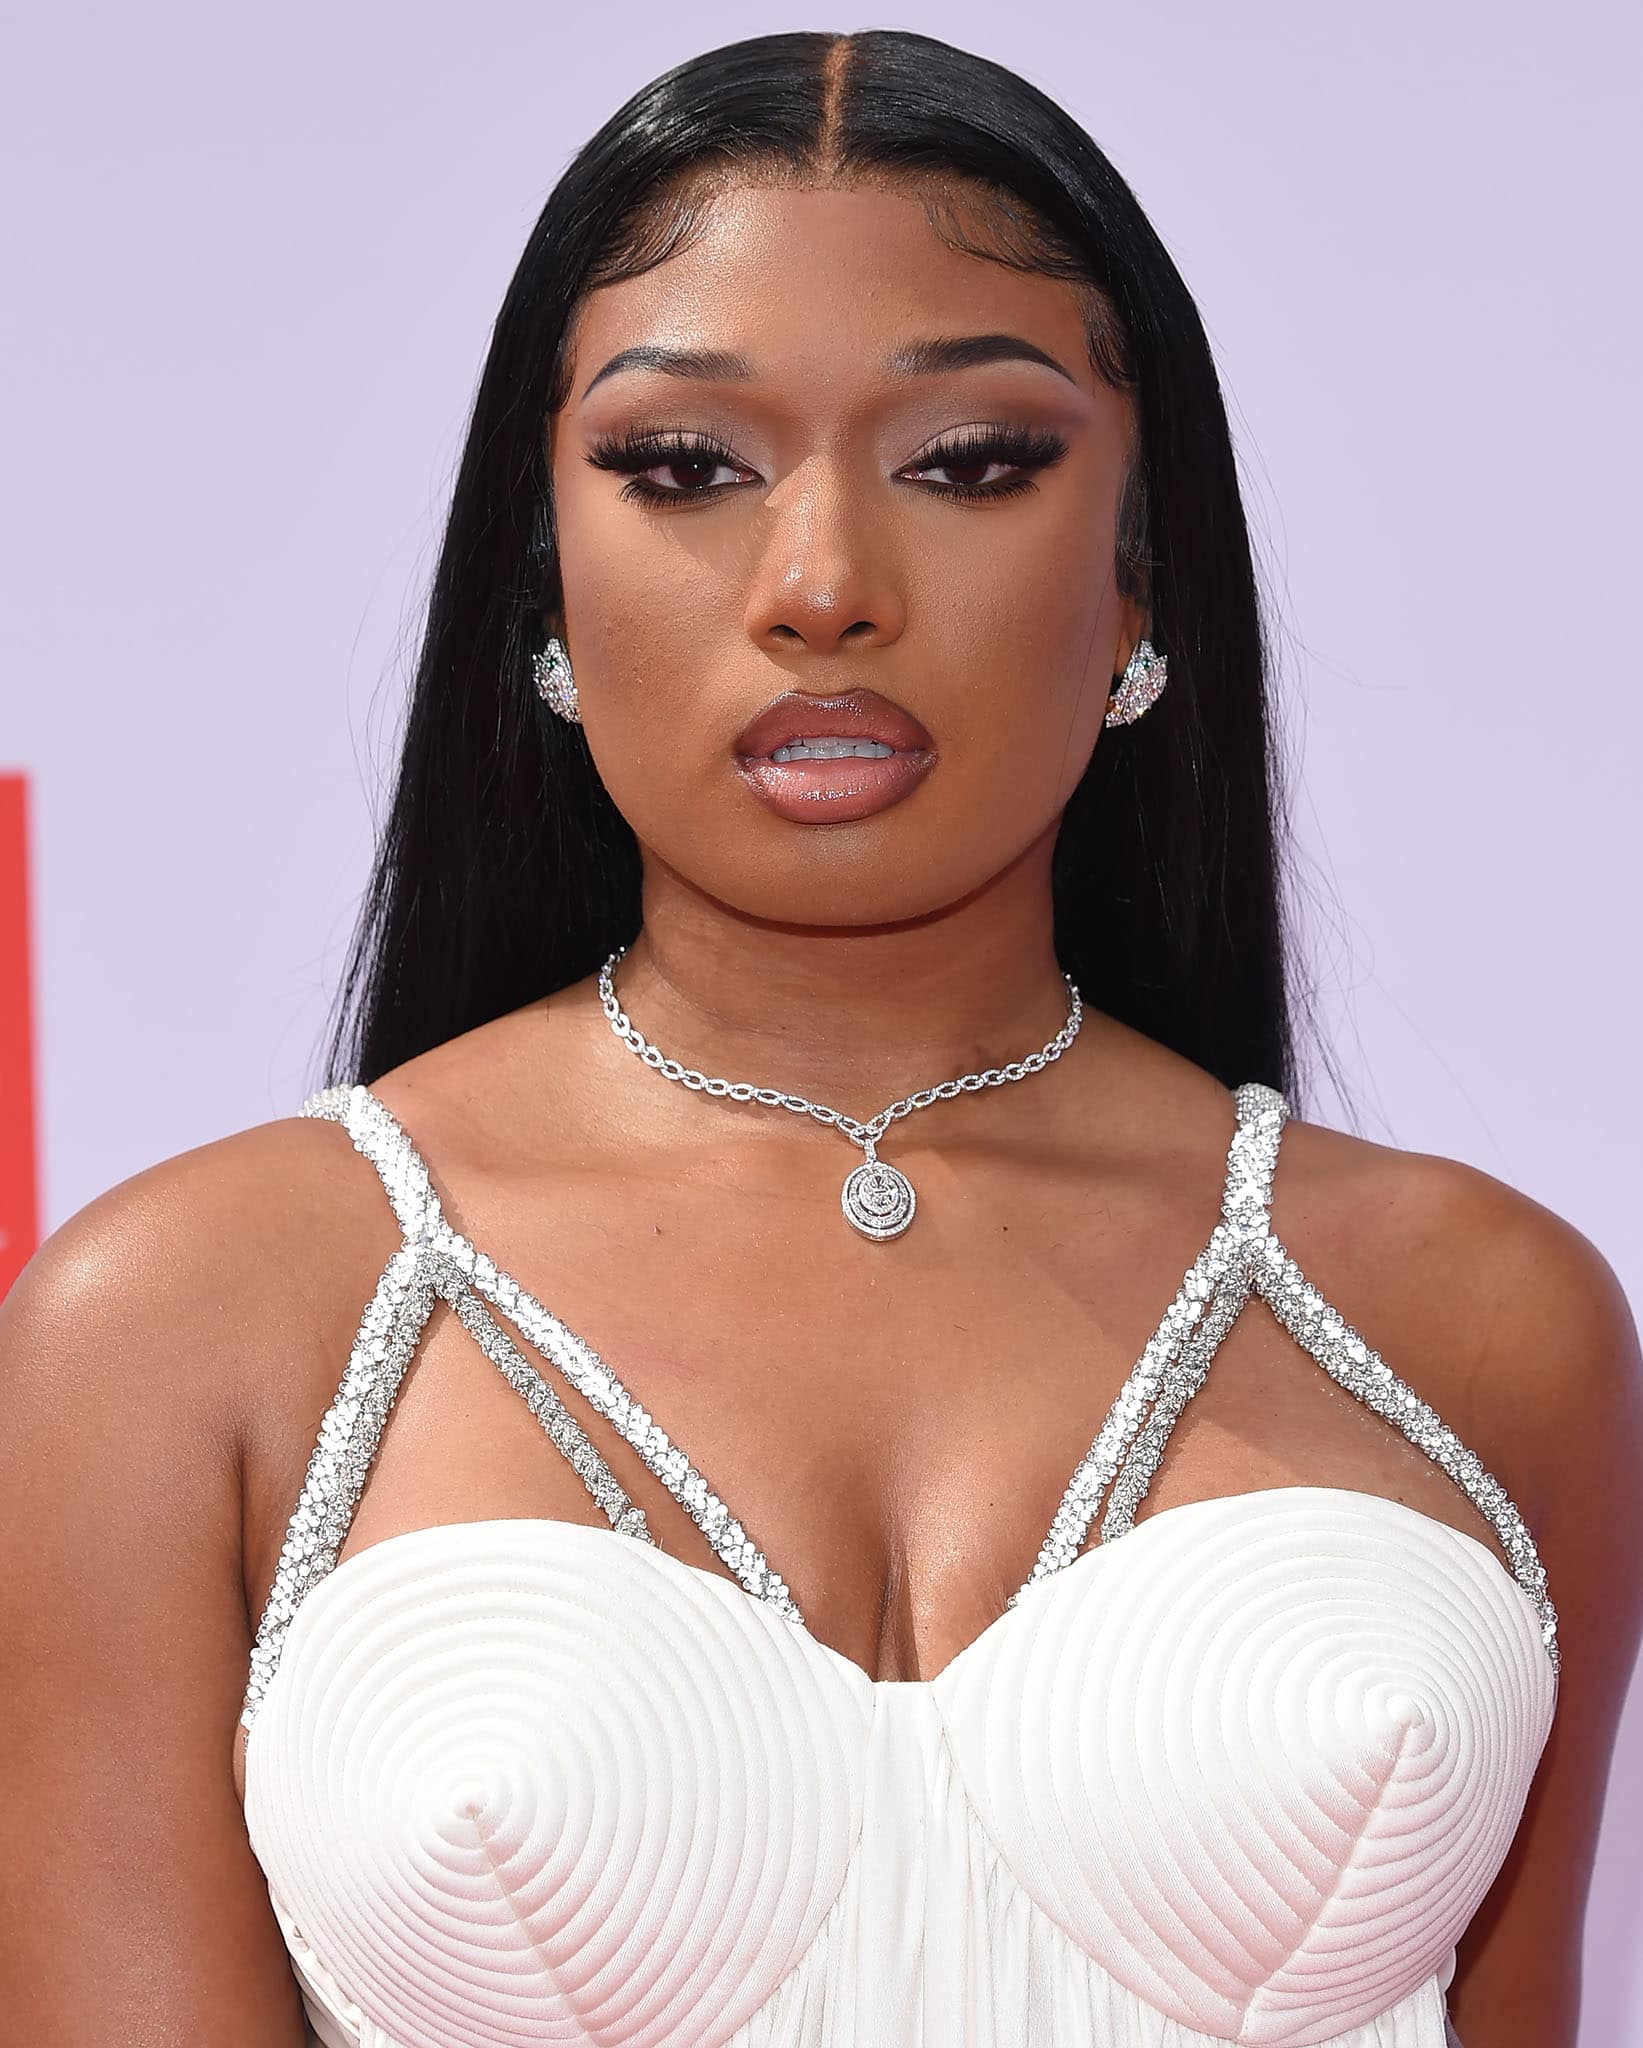 Megan Thee Stallion, influenced by her mother Holly Thomas, a rapper known as Holly-Wood, was exposed to music from a young age and has since achieved considerable success, resulting in an estimated net worth of around $12 million